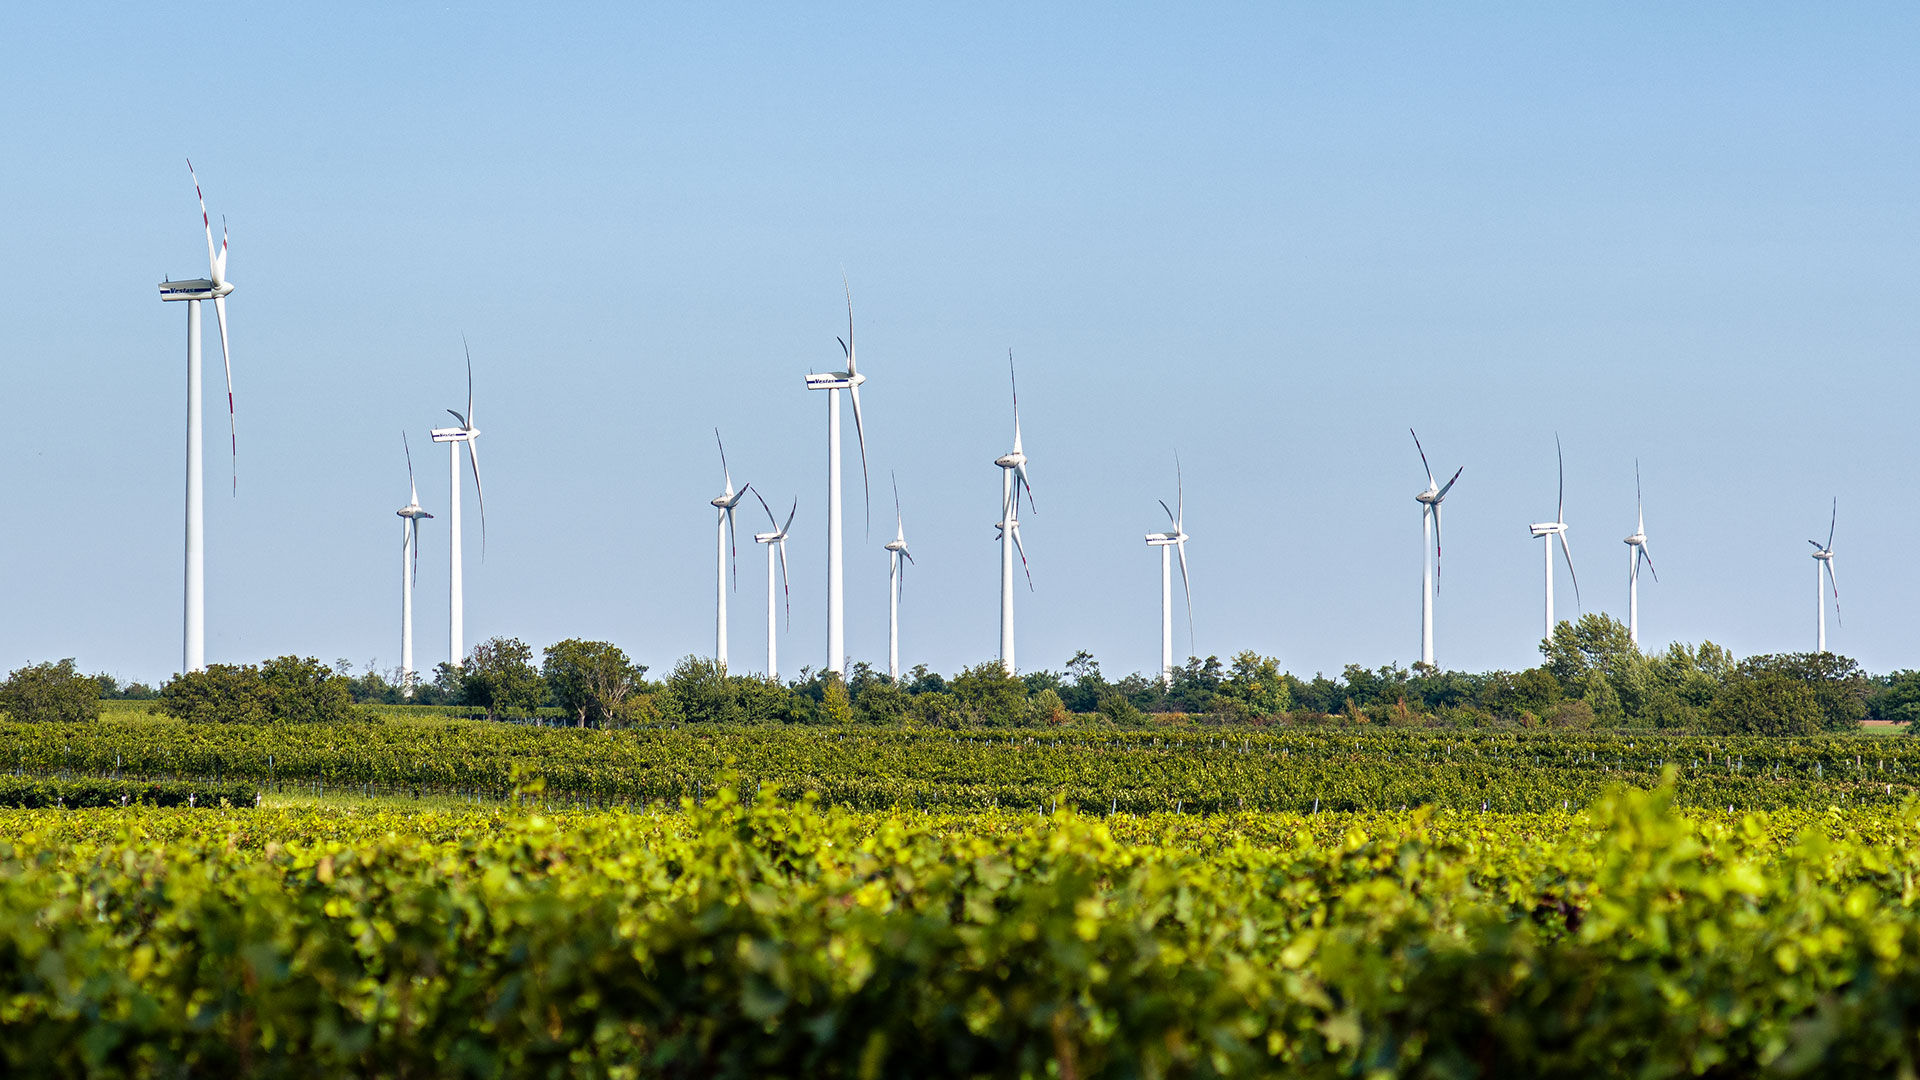 View of wind turbines and grapevines